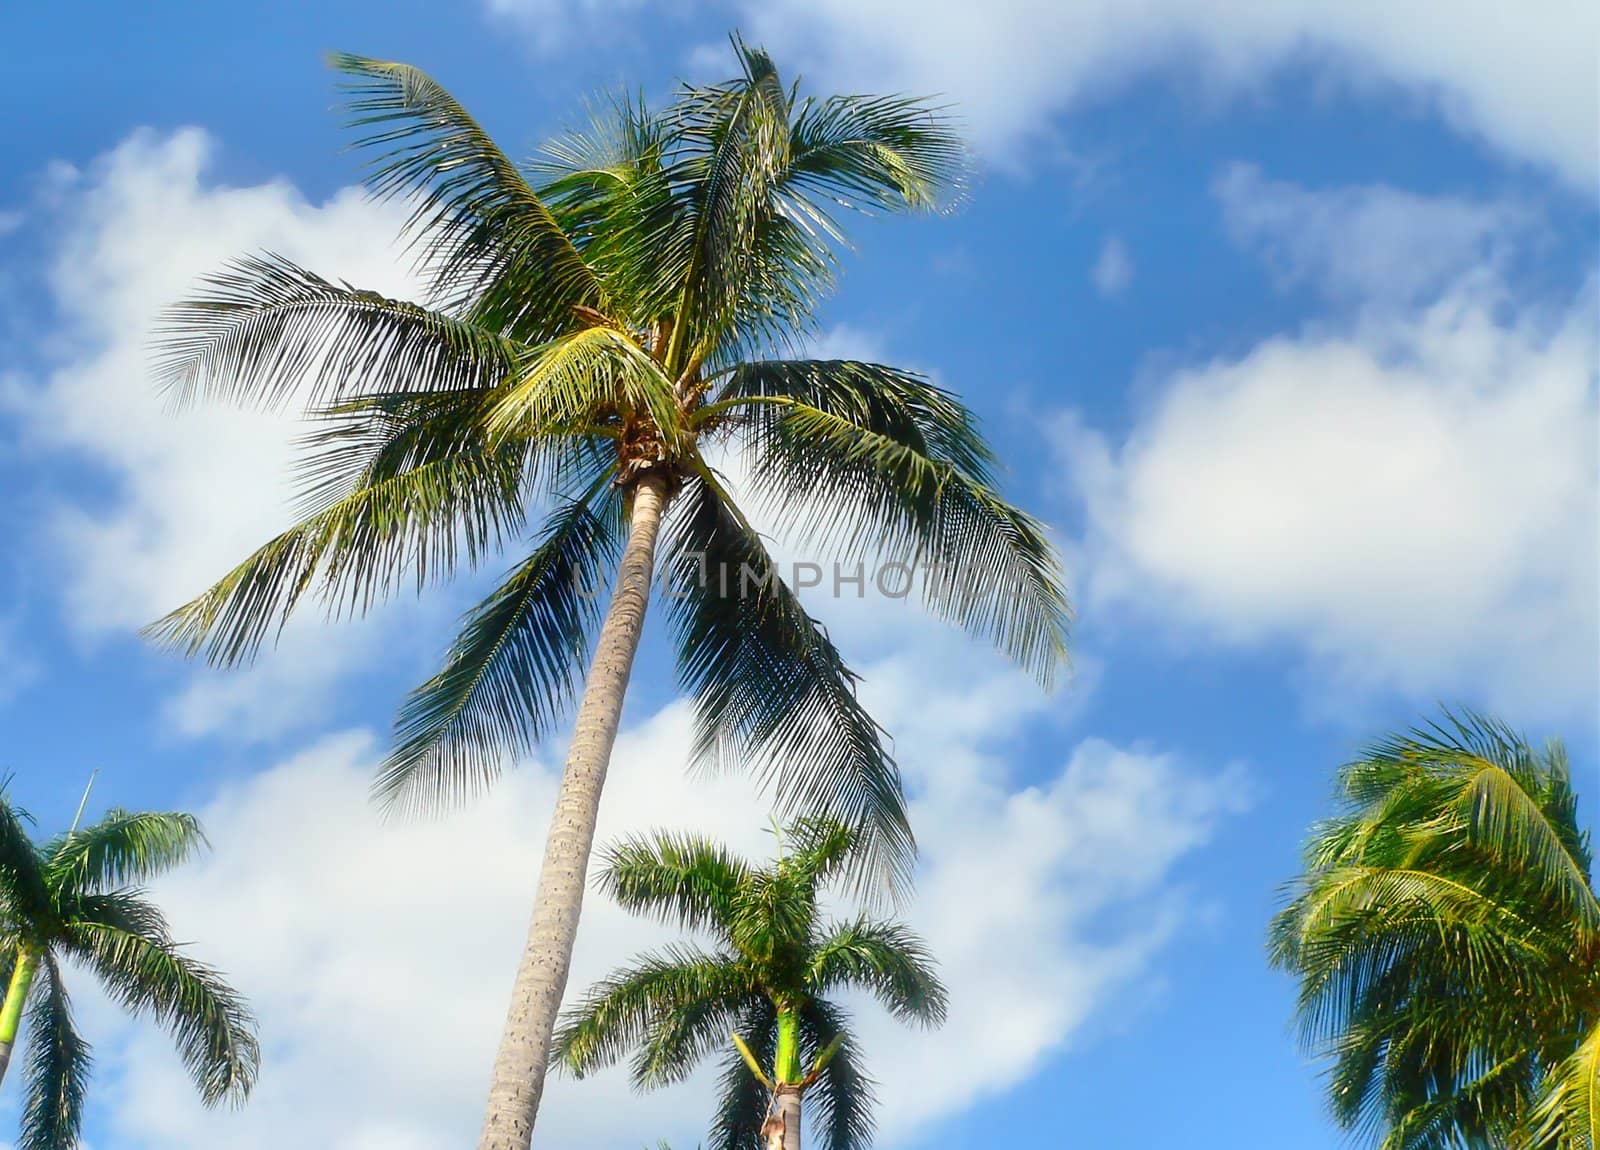 Palm trees and blue sky with puffy white clouds